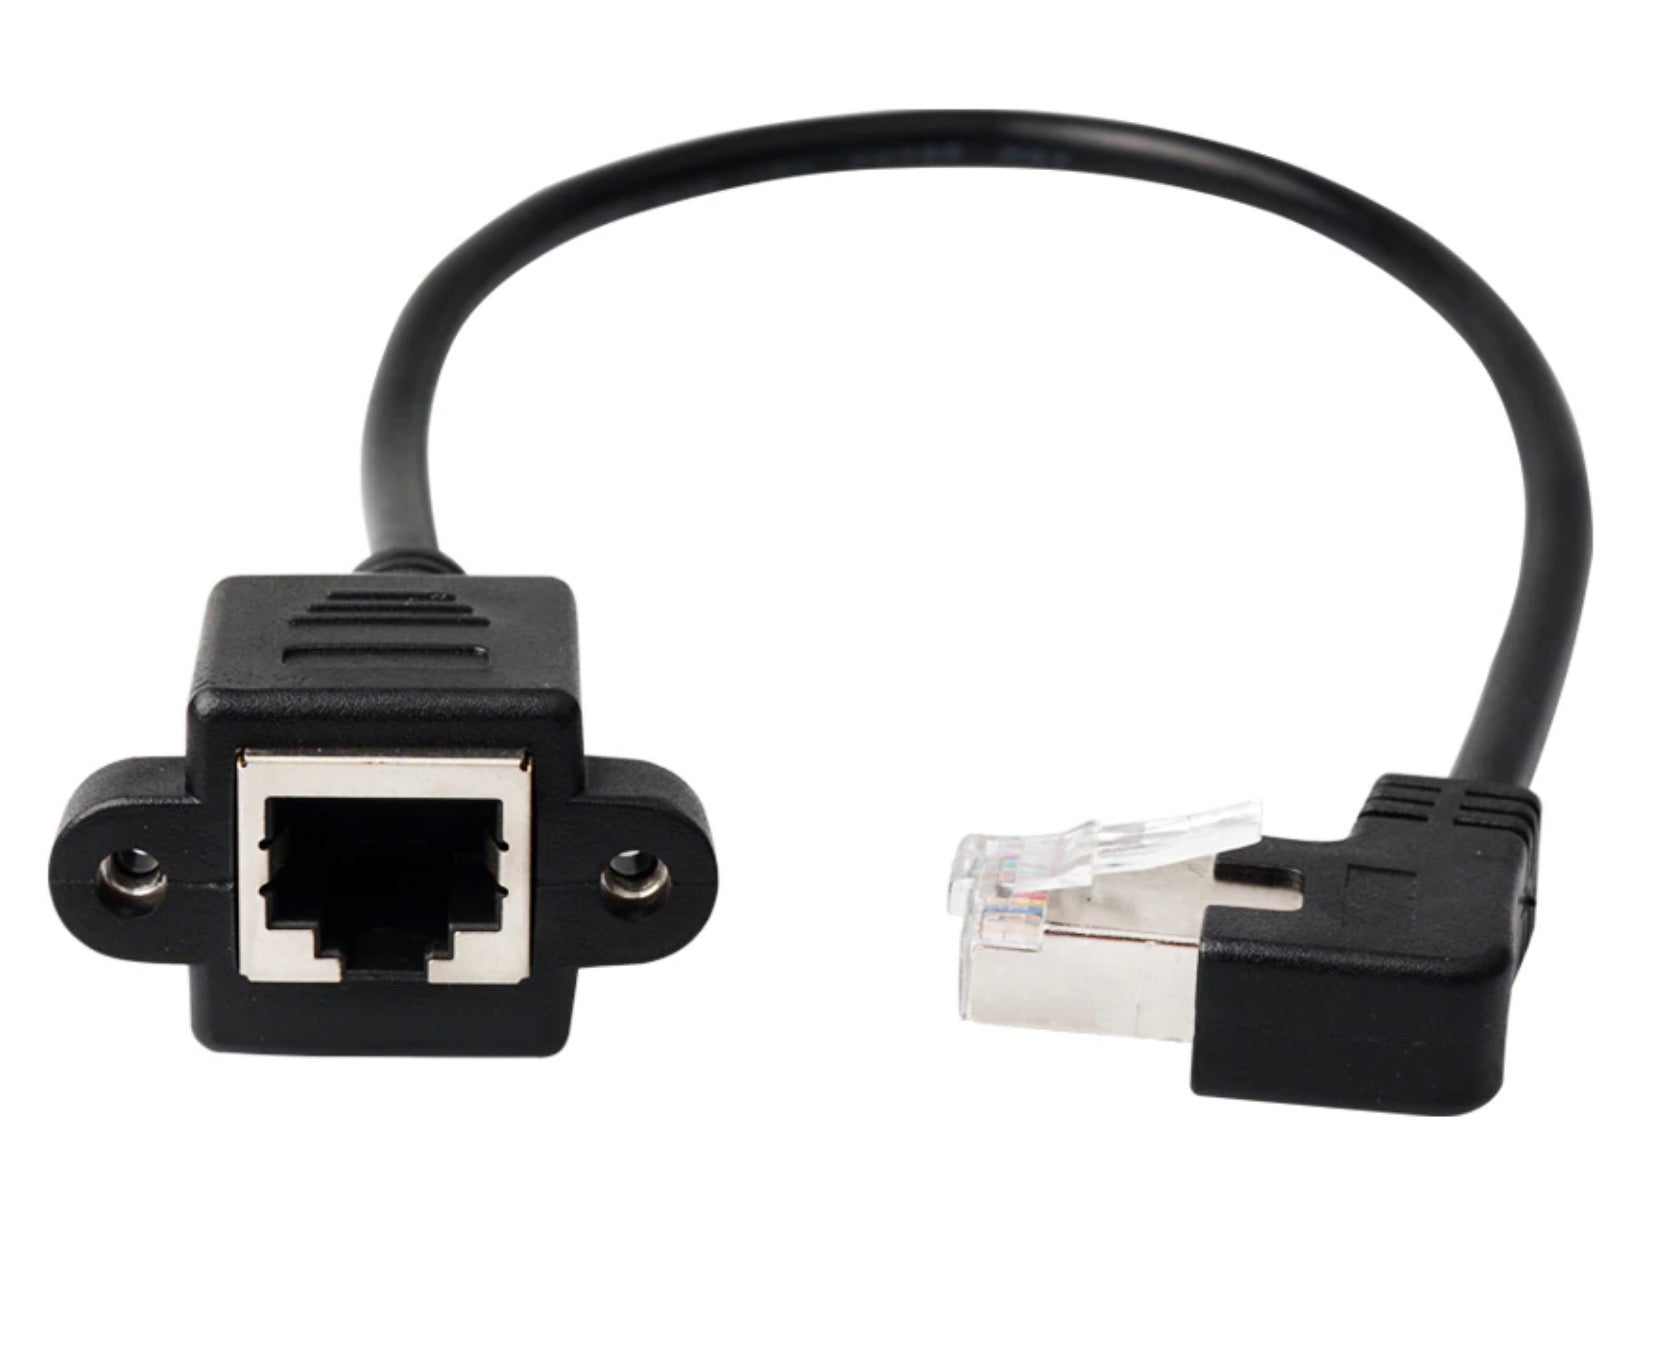 RJ45 Male to Female Shielded Lan Ethernet Panel Mount Extension Cable 0.3m